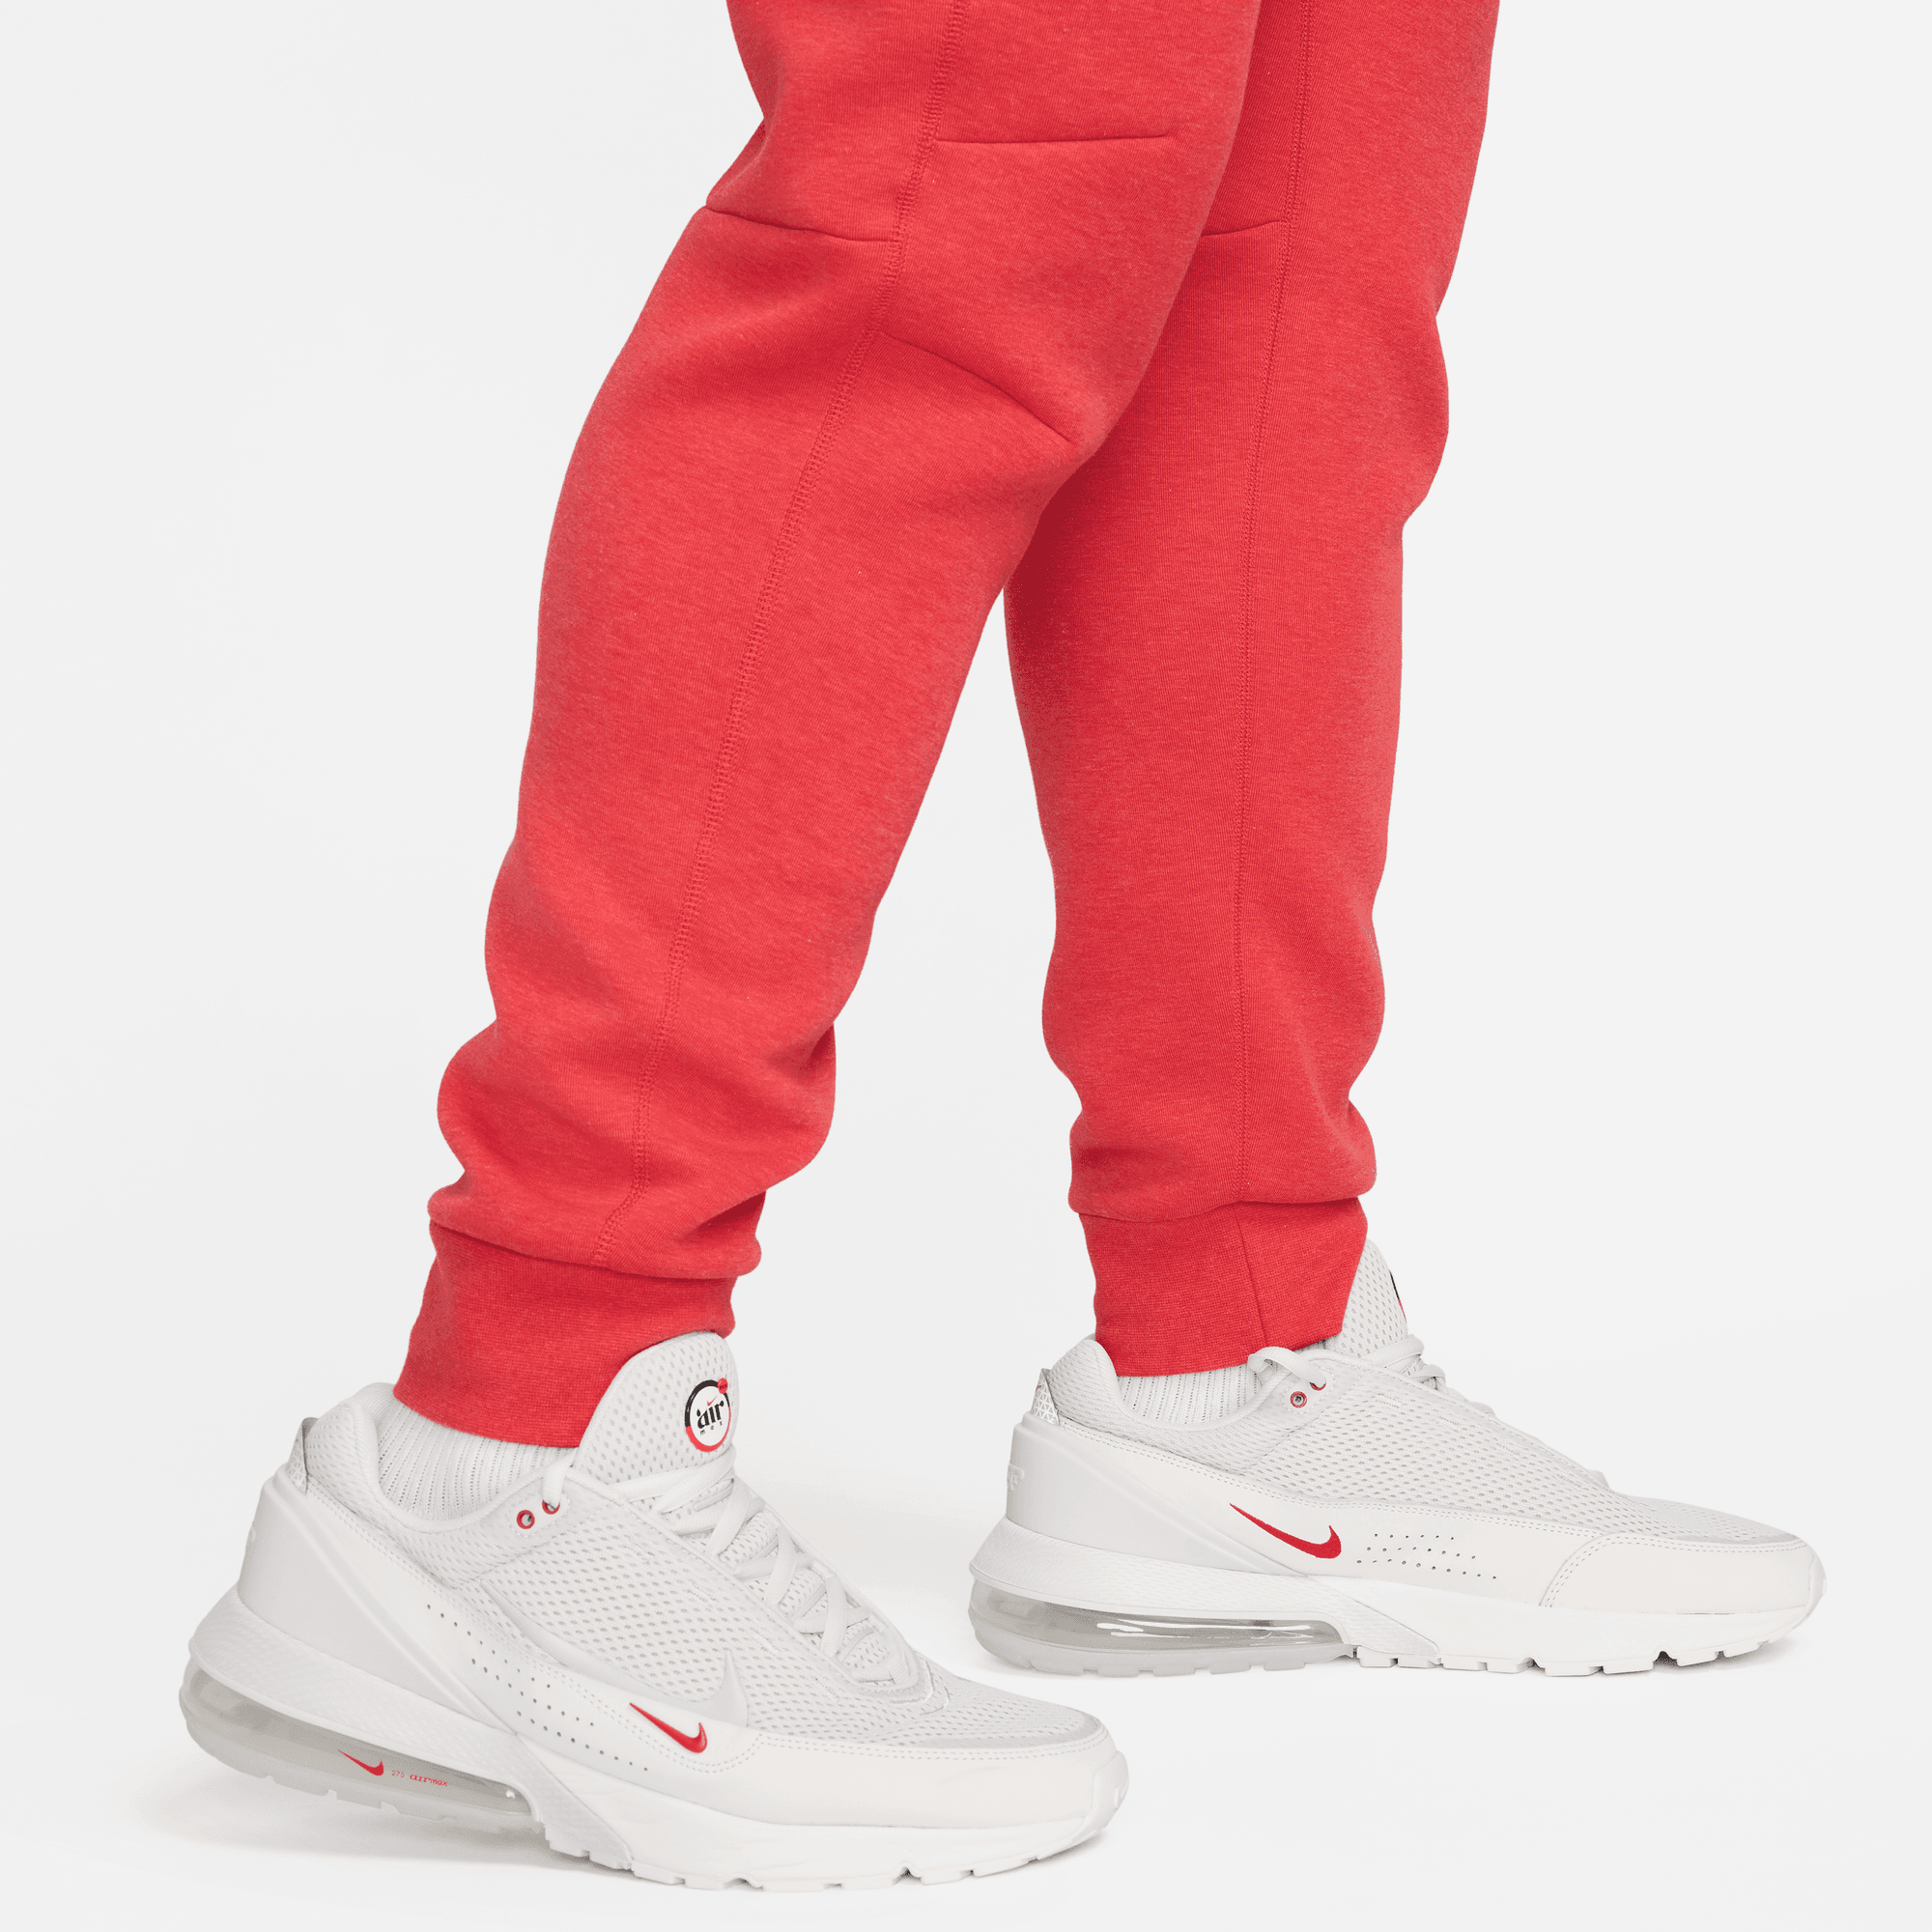 Nike Sportswear CLUB PANT WIDE - Tracksuit bottoms - university  red/white/red 